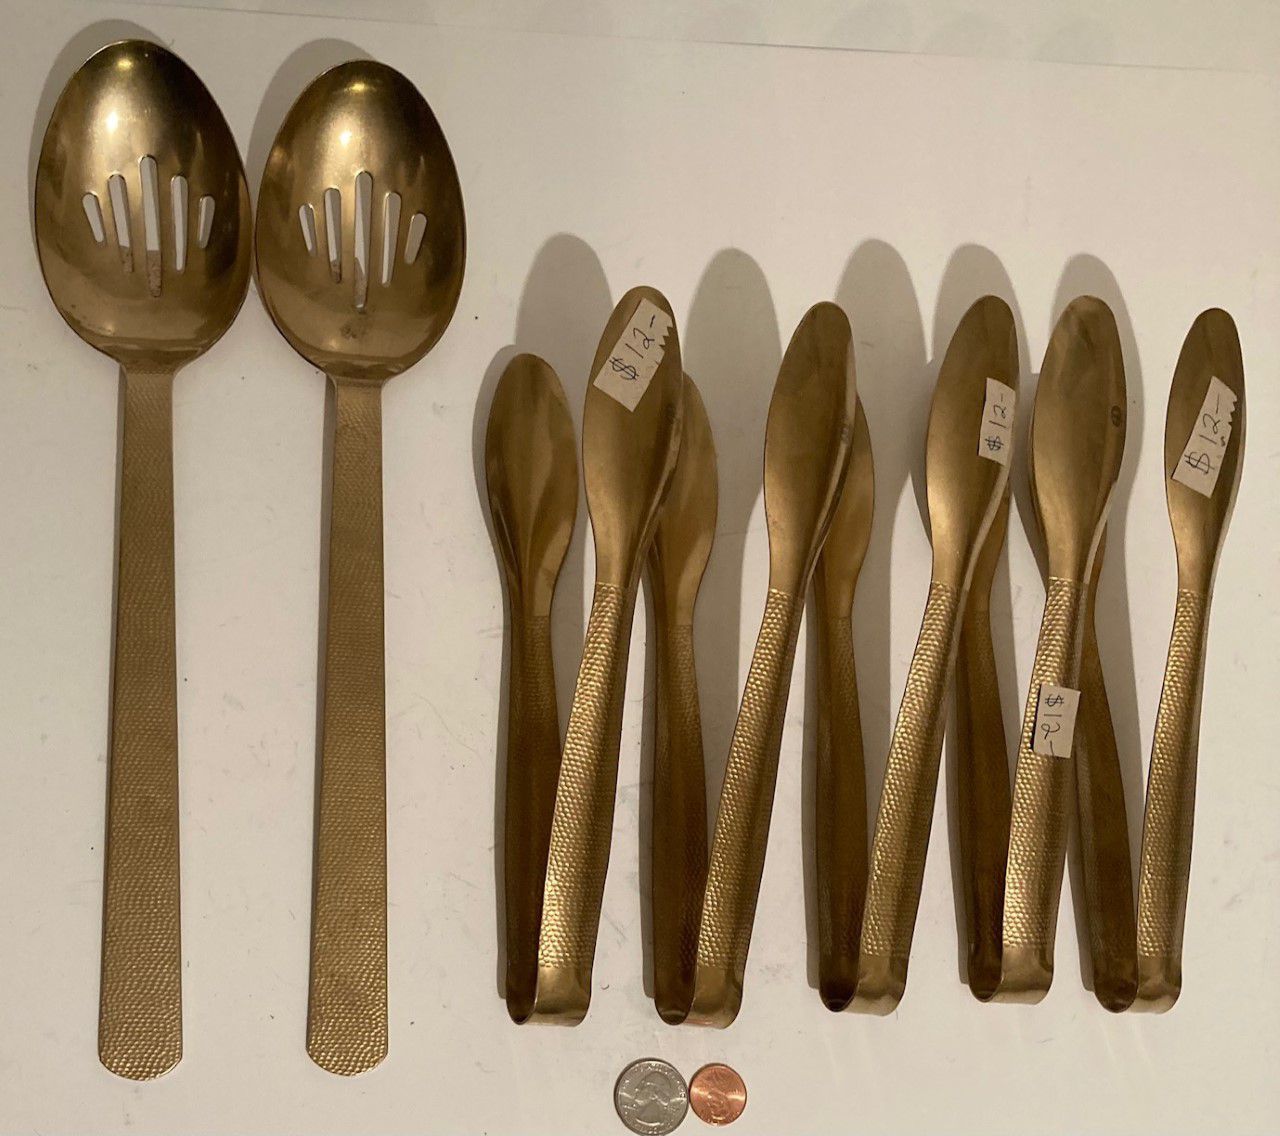 Vintage Set of 7 Brass Serving Utensils, 2 Strainers Spoons and 5 Tongs, 13" and 9" Long Each One, Heavy Duty, Quality, Kitchen Decor, Hanging Display